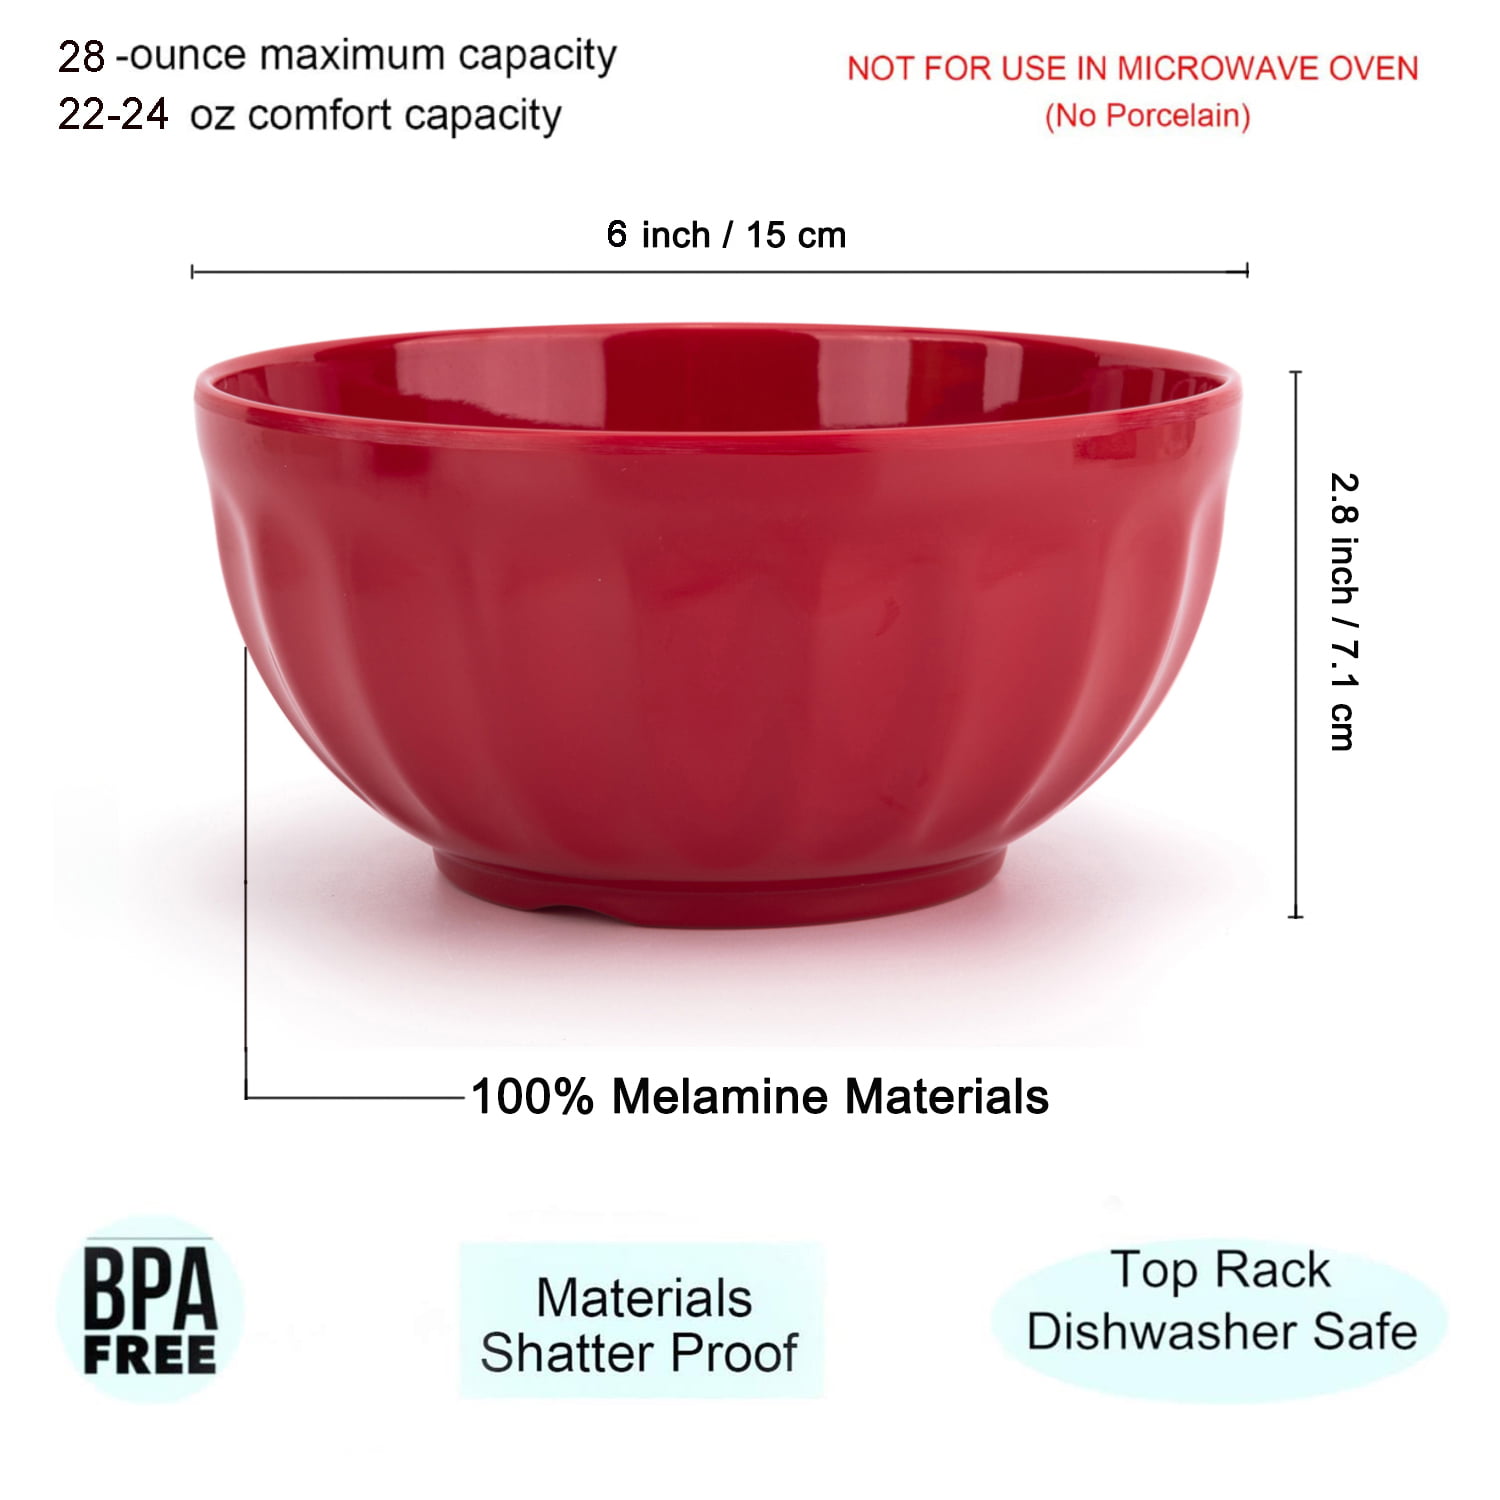 KX-WARE Plastic Bowls with Lids set of 6 - Unbreakable and Reusable 6-inch  Plastic Cereal/Soup/Salad Bowls Multicolor, Microwave/Dishwasher Safe, BPA